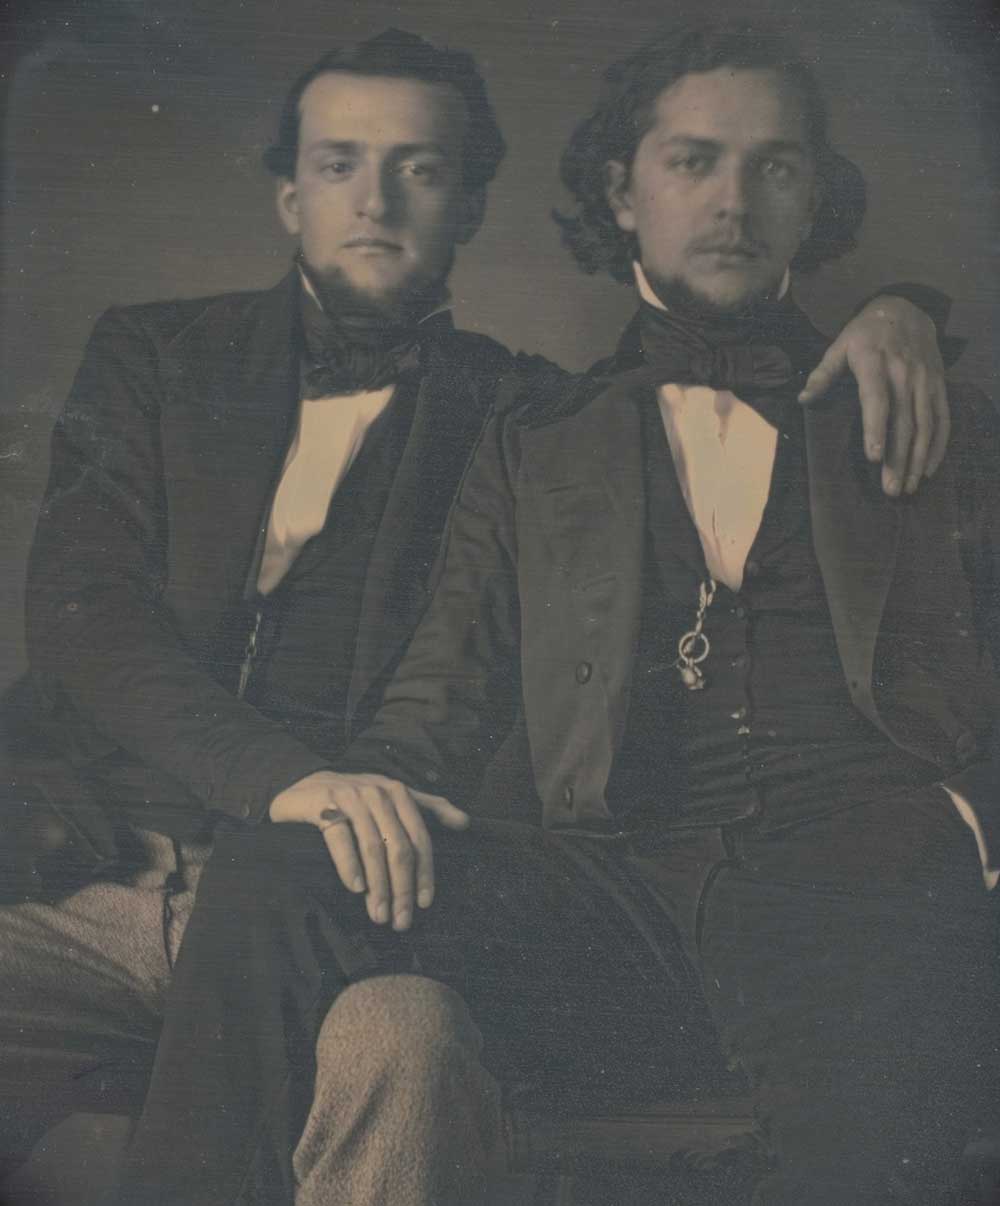 Two Young Men, United States, c. 1850.